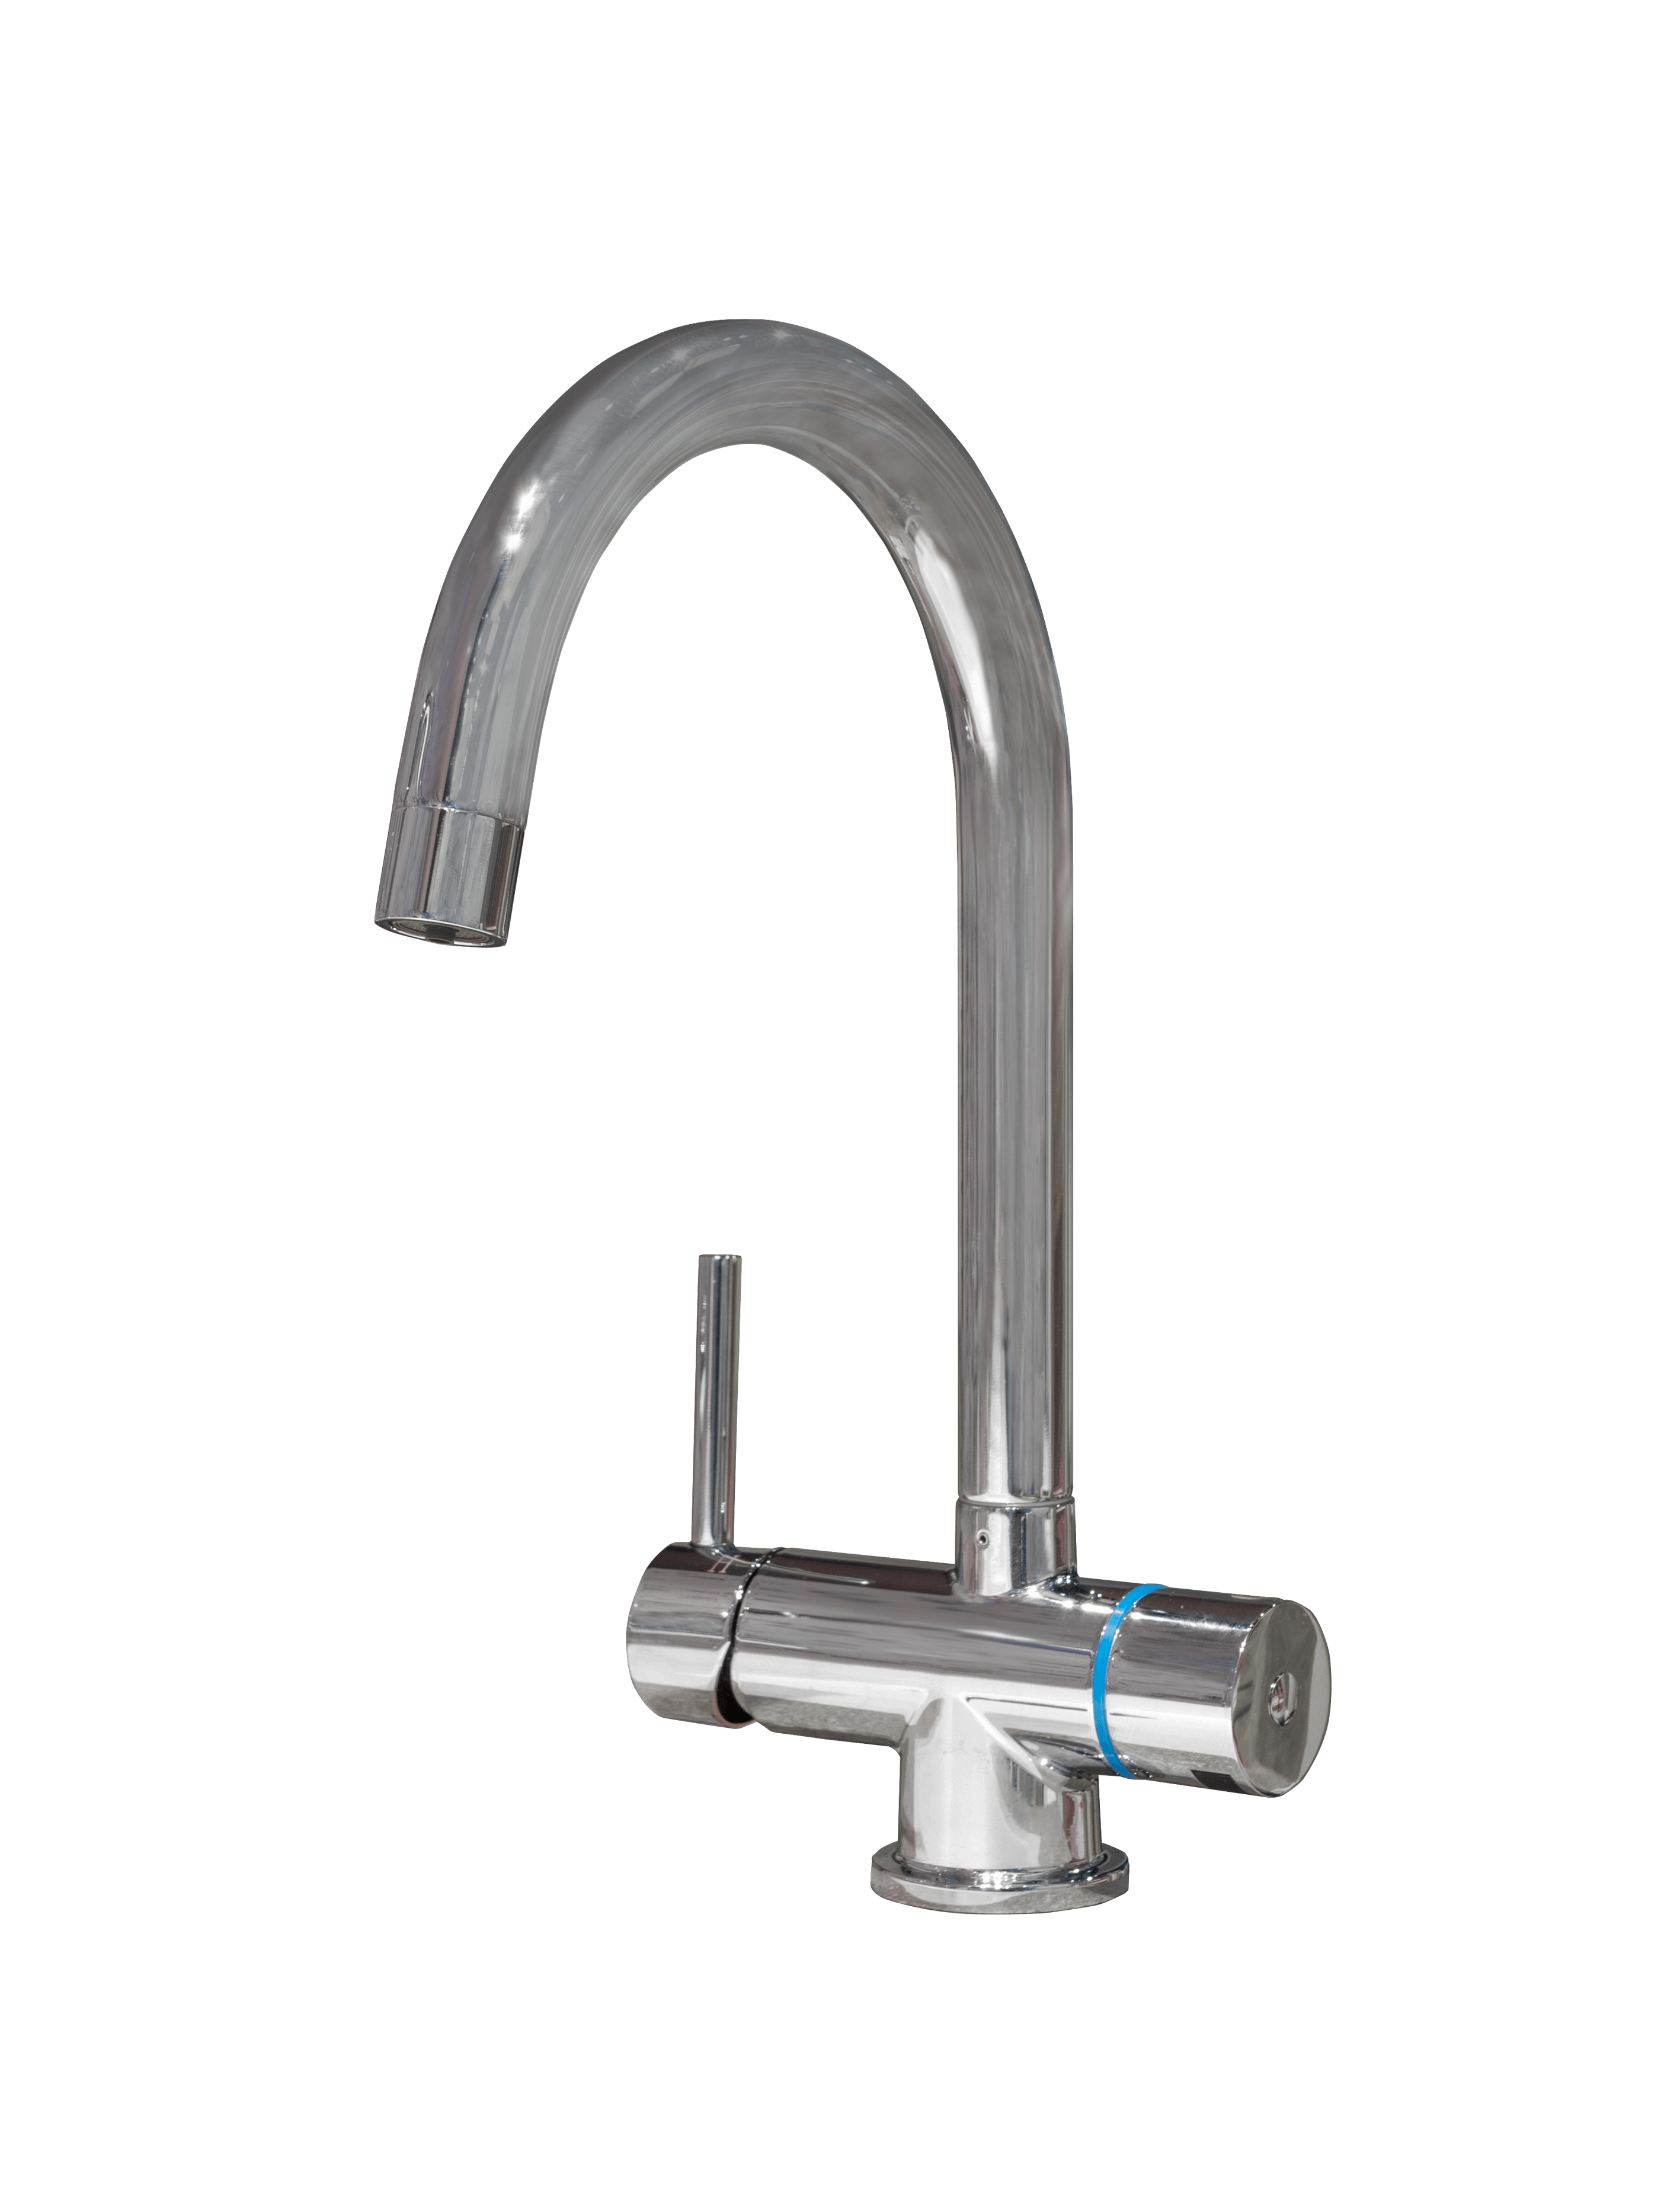 NKDP3538CP-LAB Kitchen&drinking faucet cross 3/8" FIP nut for hot/cold water Кран для фильтра